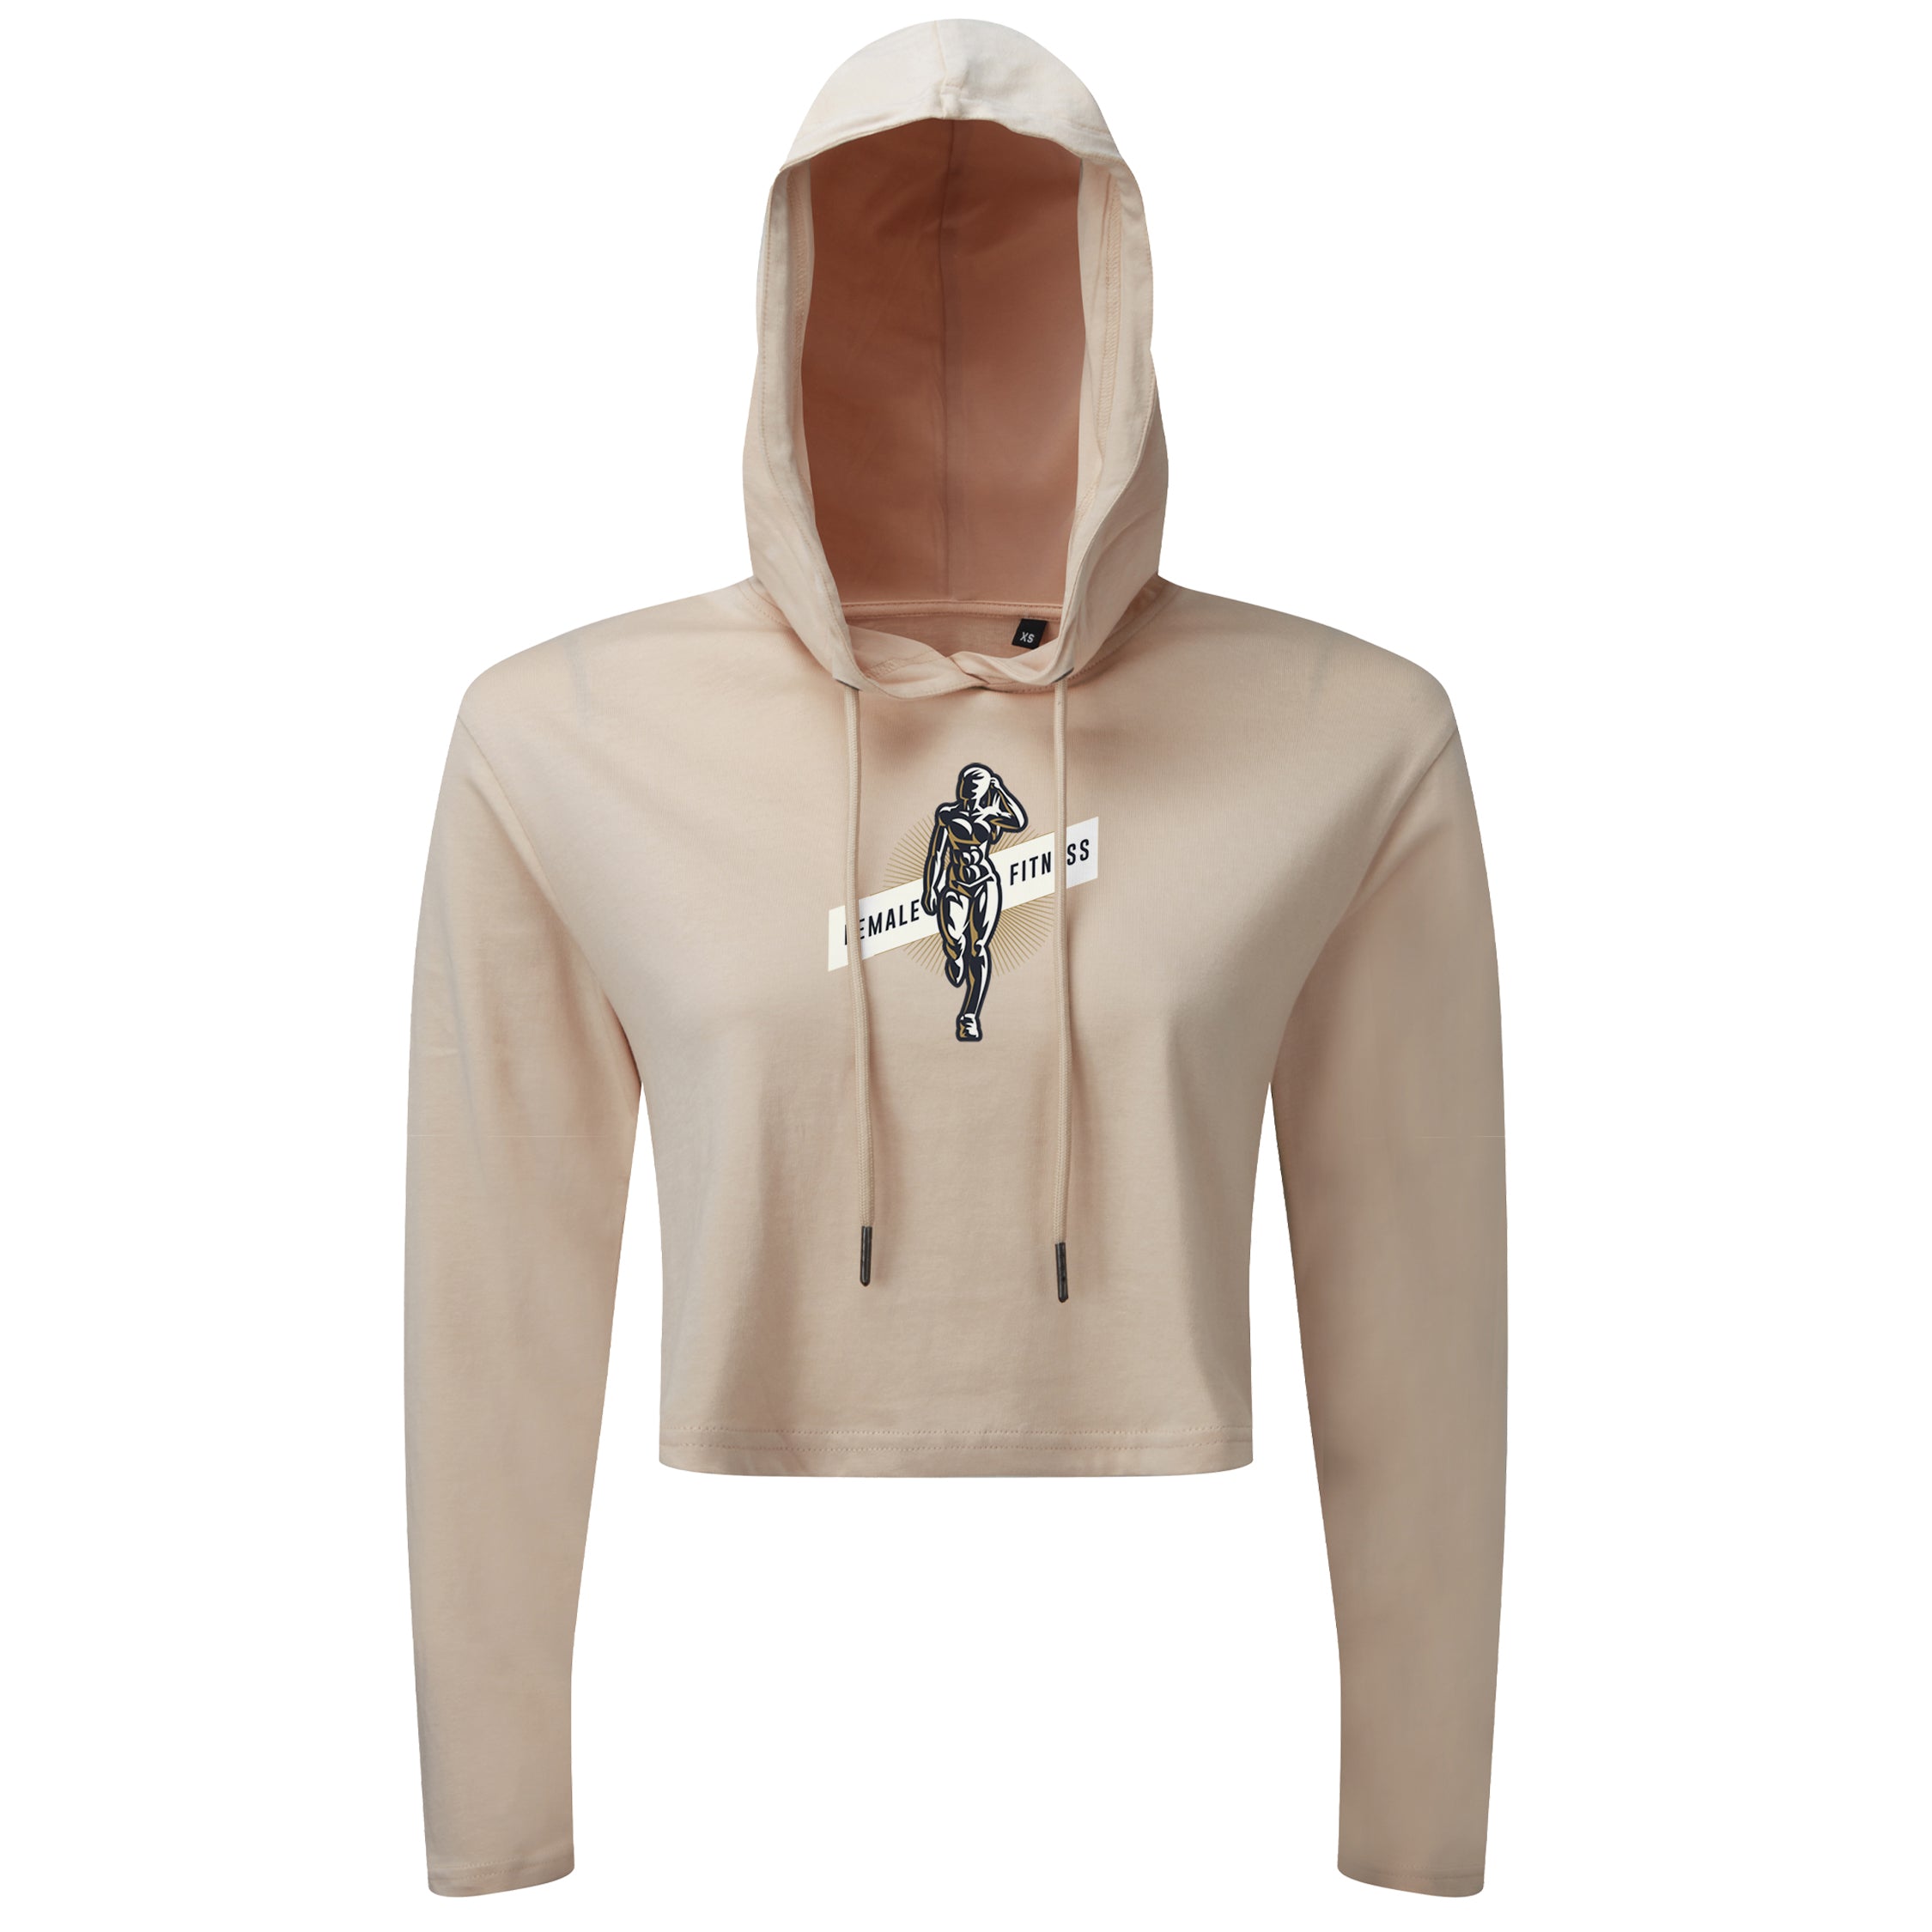 Strong Woman Female Fitness - Cropped Hoodie